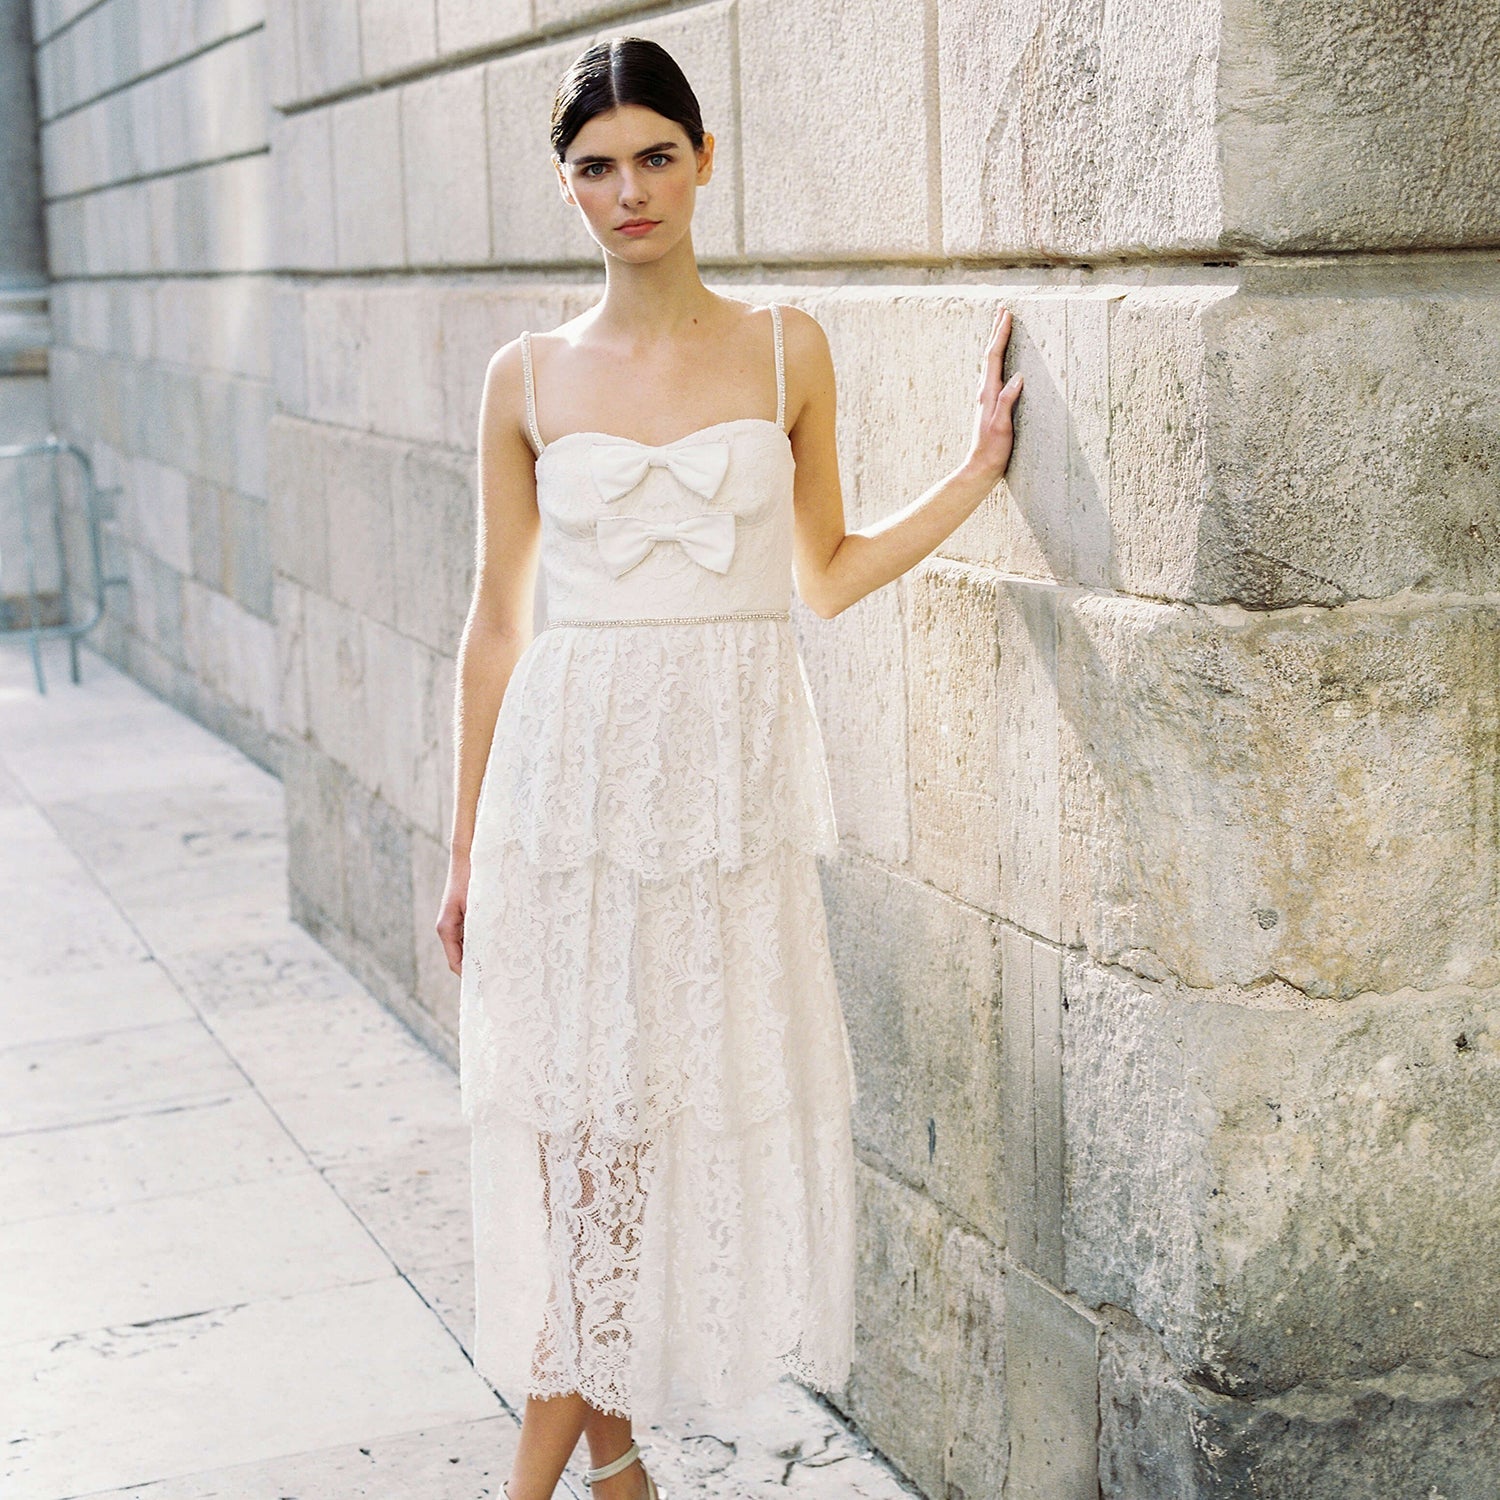 A woman wearing the Cream Cord Lace Tiered Midi Dress